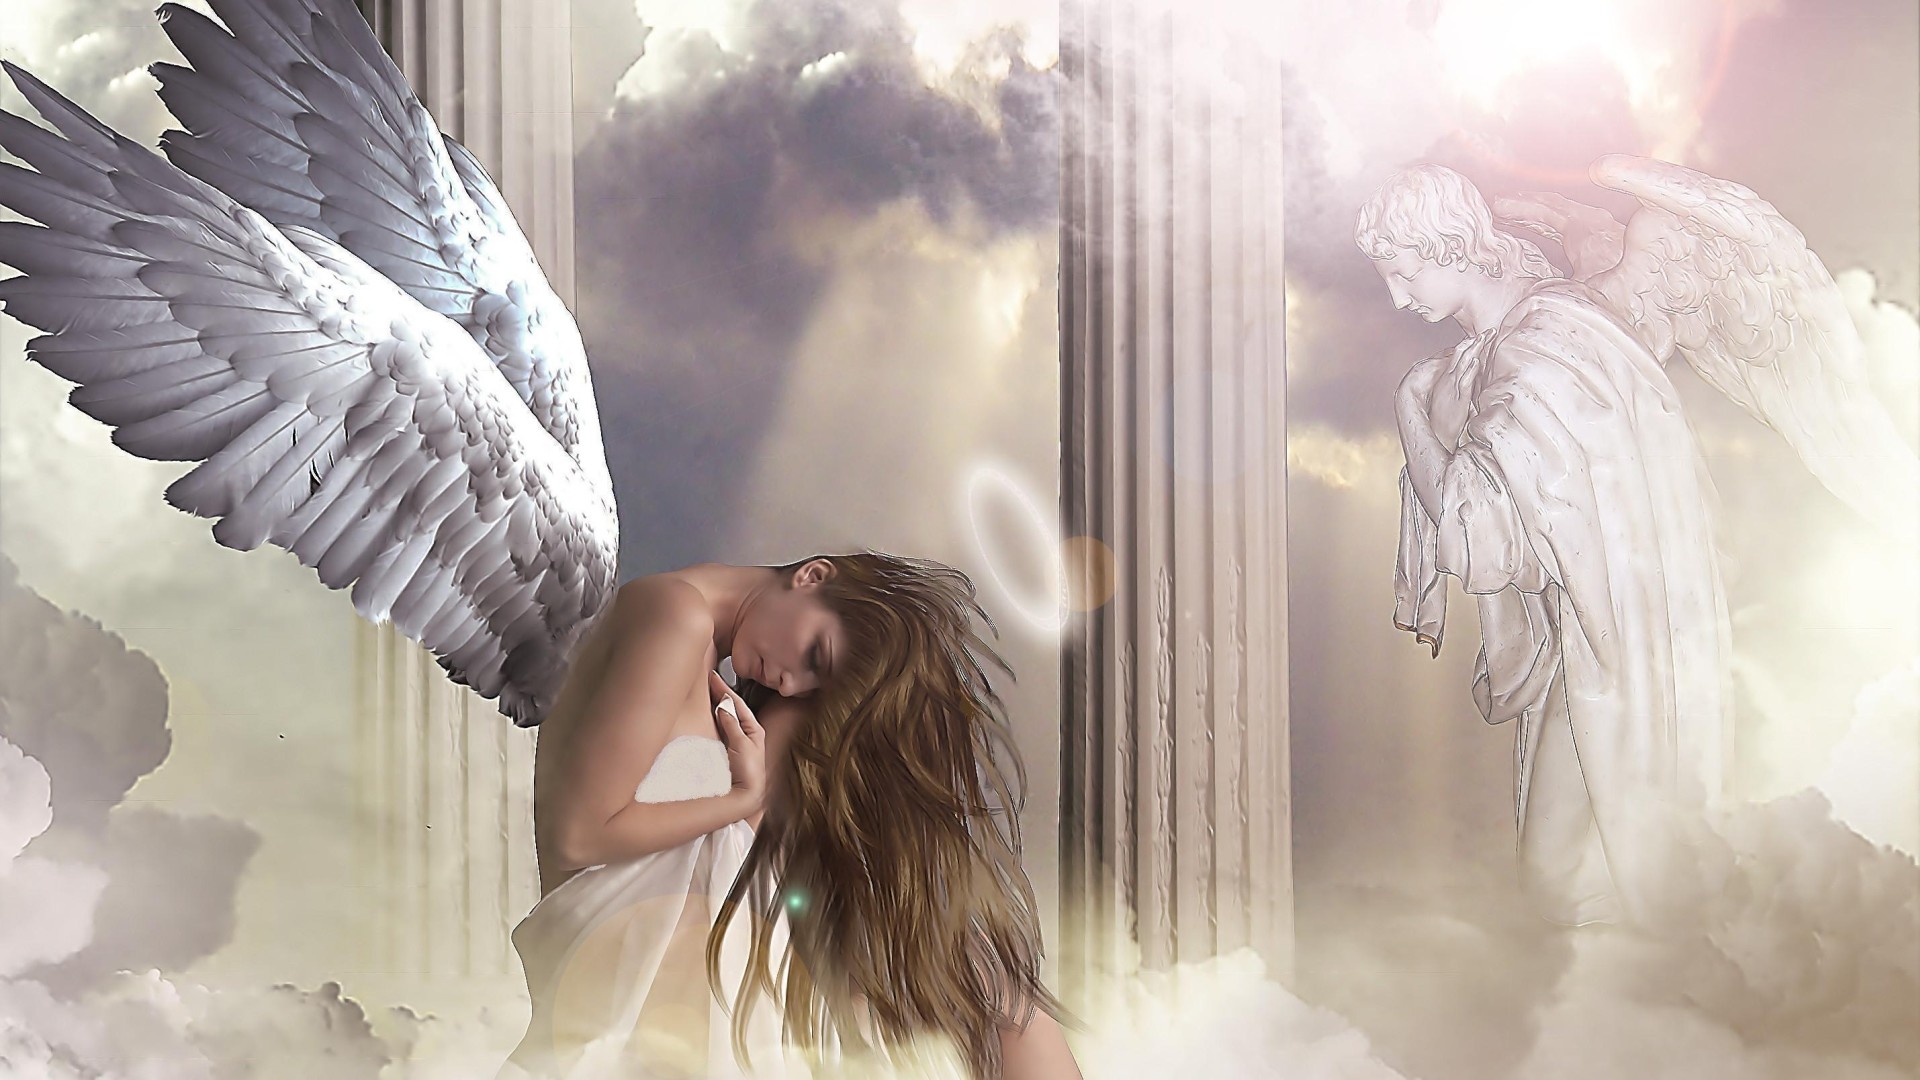 1920x1080 angel wallpaper images Angel Full HD Wallpaper and Background Image   ID:144834